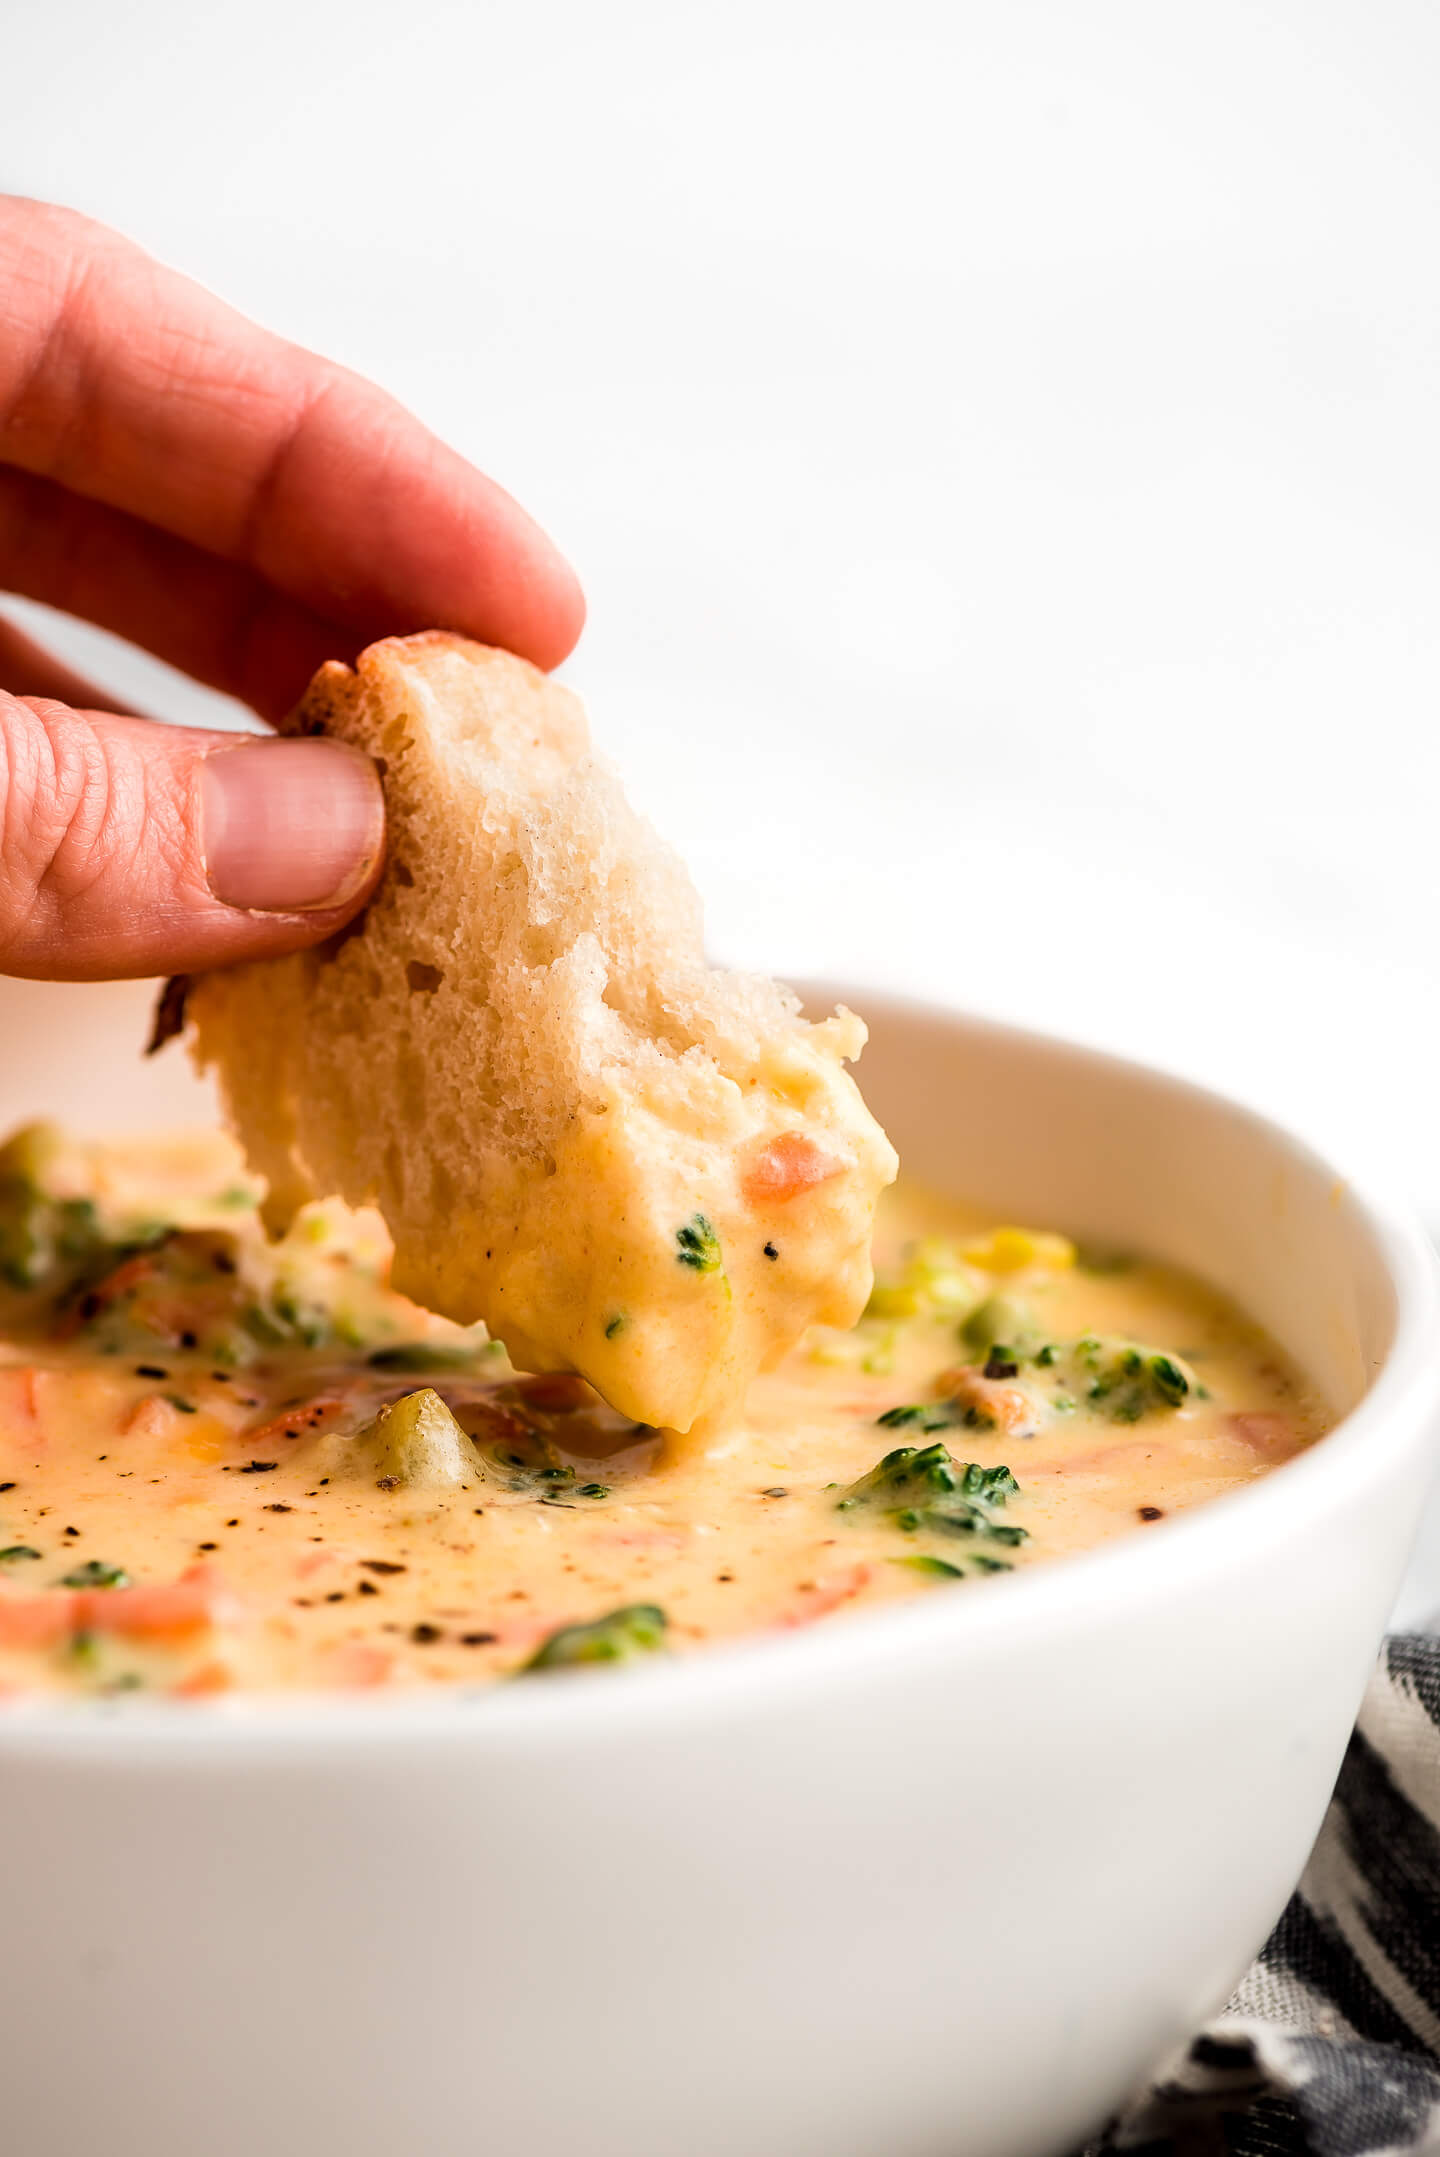 Dipping a piece of bread in thick and creamy Broccoli Cheddar Soup.